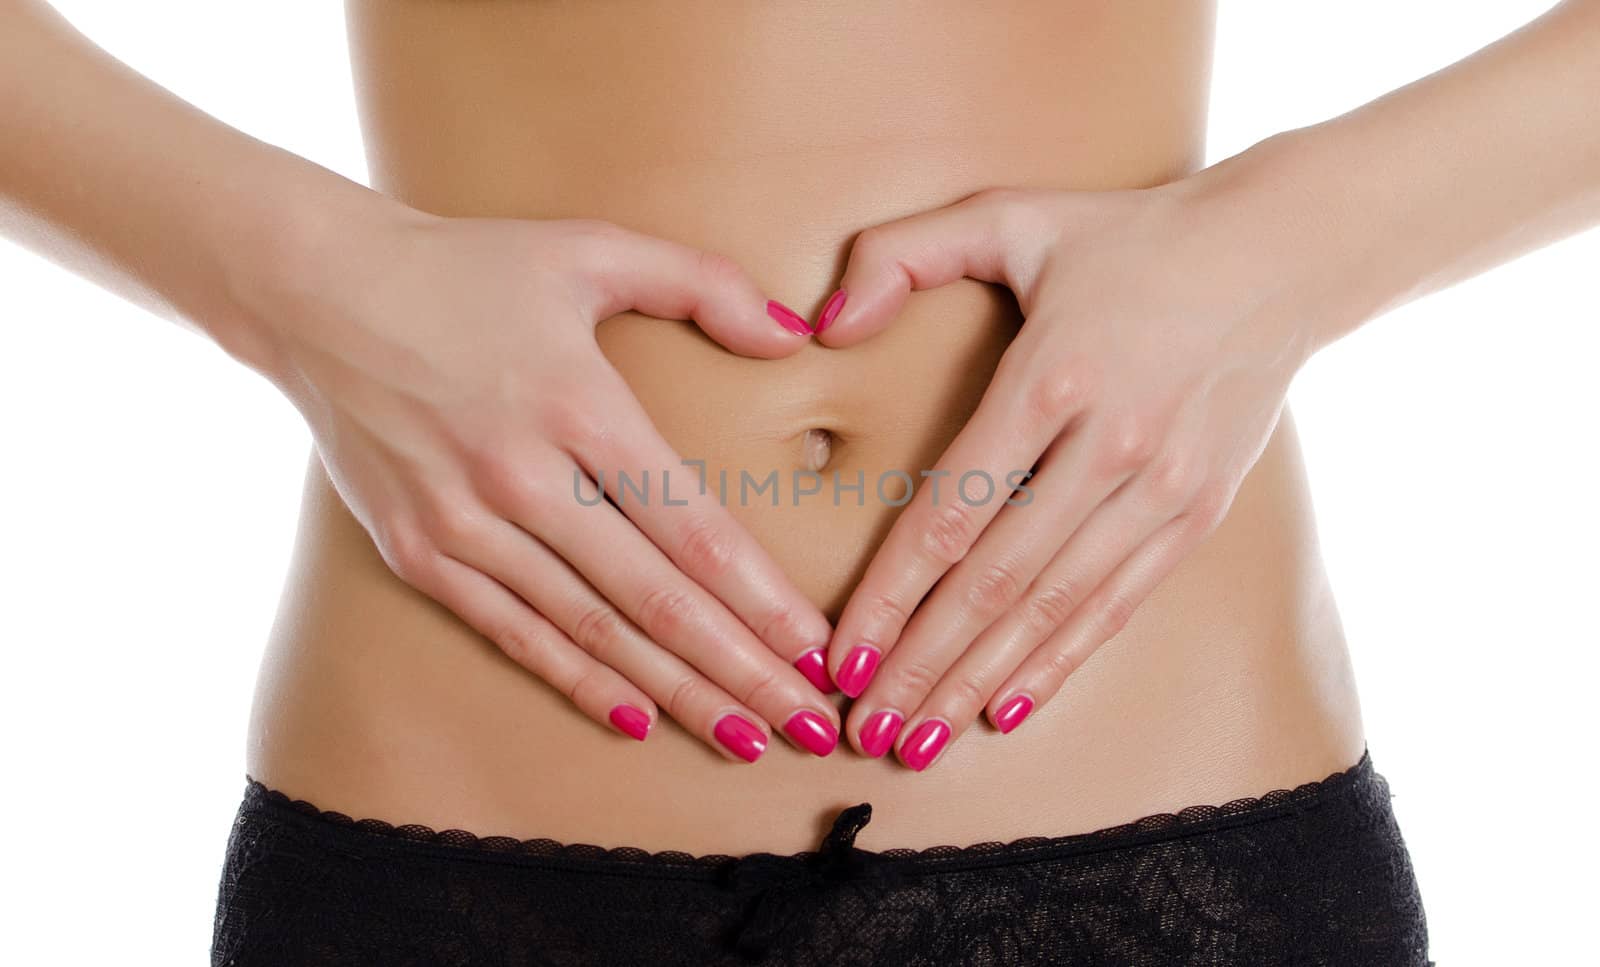 Female making heart shape with her hands on her belly. Isolated on white. by dmitrimaruta